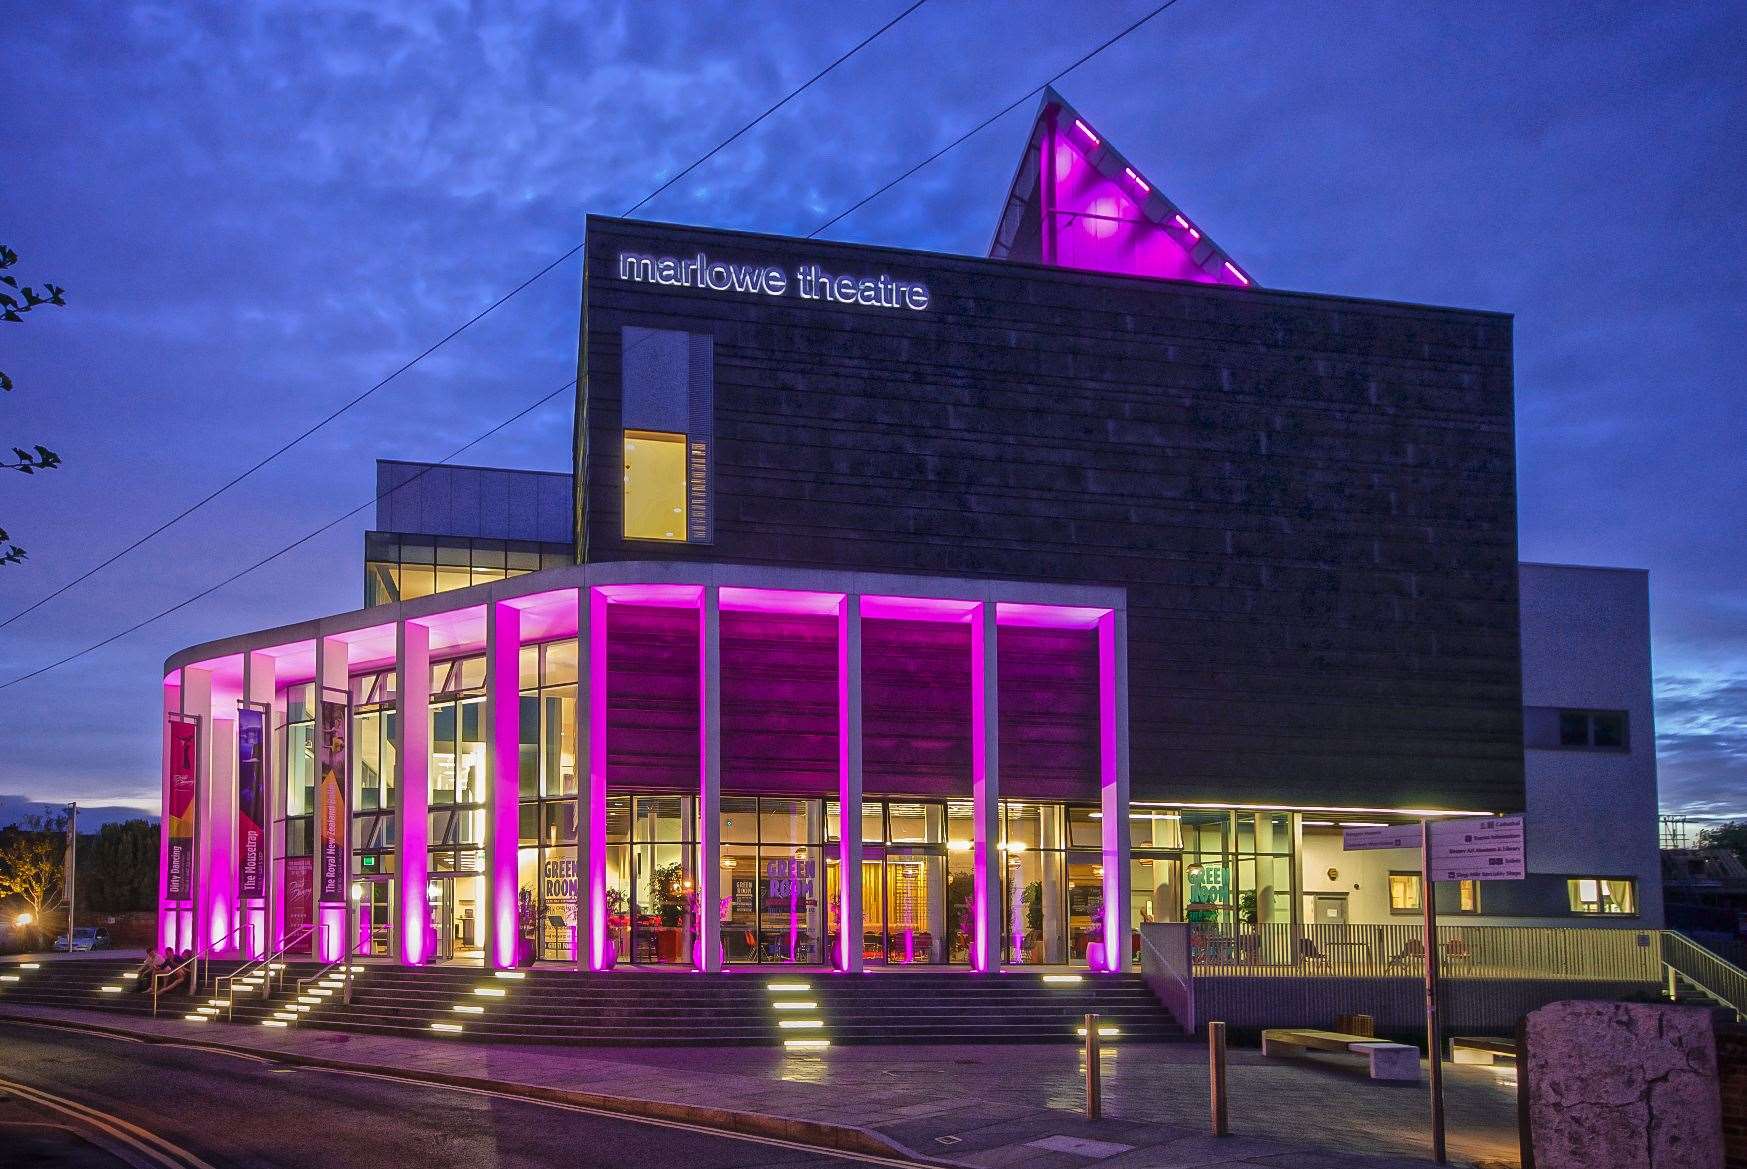 The Marlowe Theatre in Canterbury is one of the two Kent theatres the new show will stop at